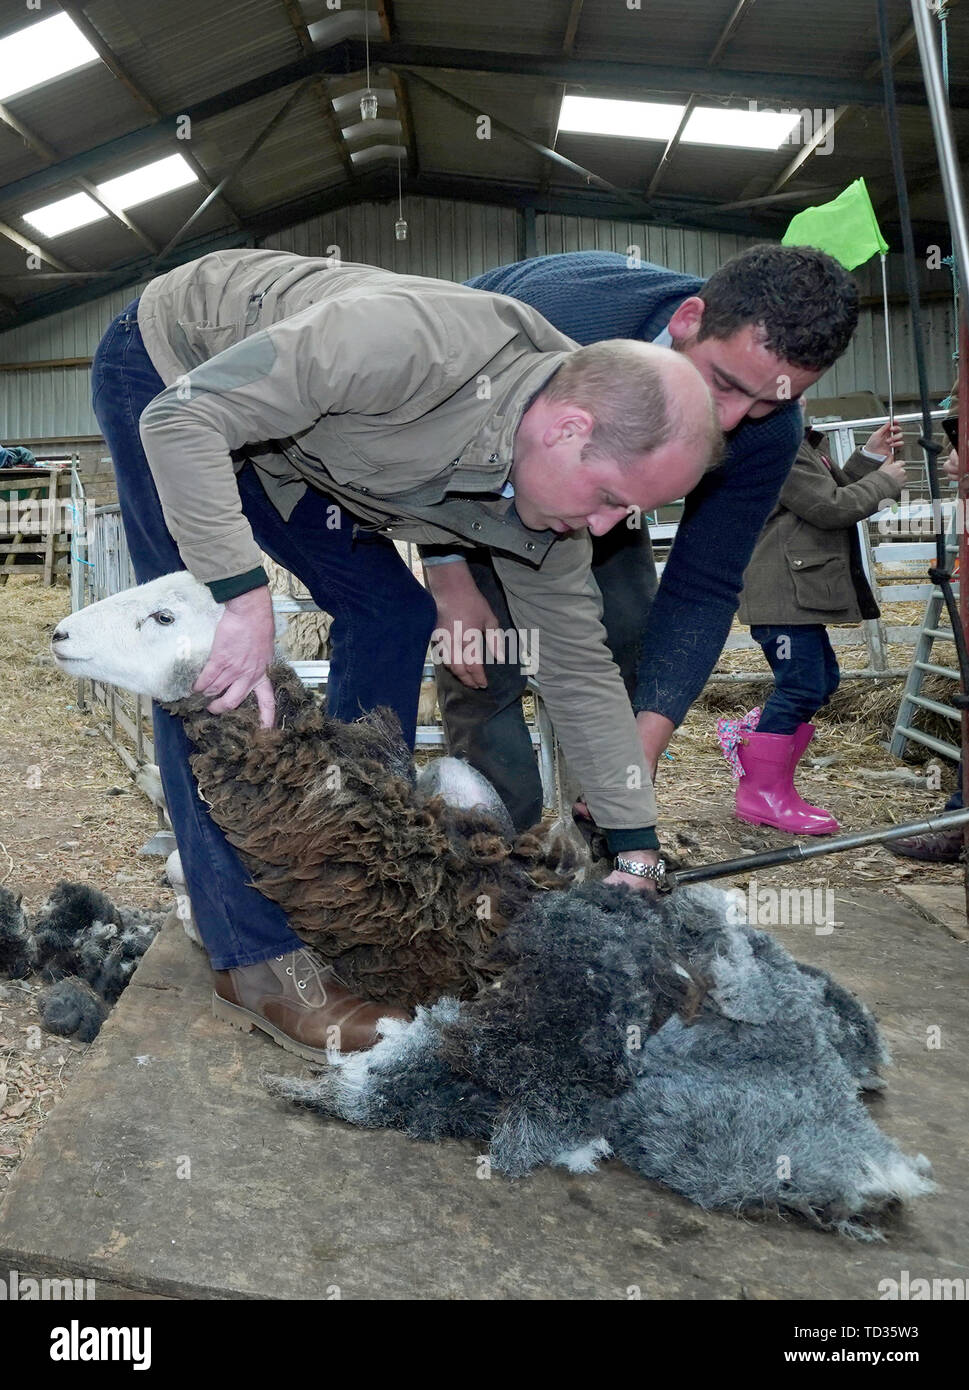 The Duke of Cambridge taking part in sheep shearing with Jack Cartmel at Deepdale Hall Farm, a traditional fell sheep farm, in Patterdale, Cumbria. Stock Photo